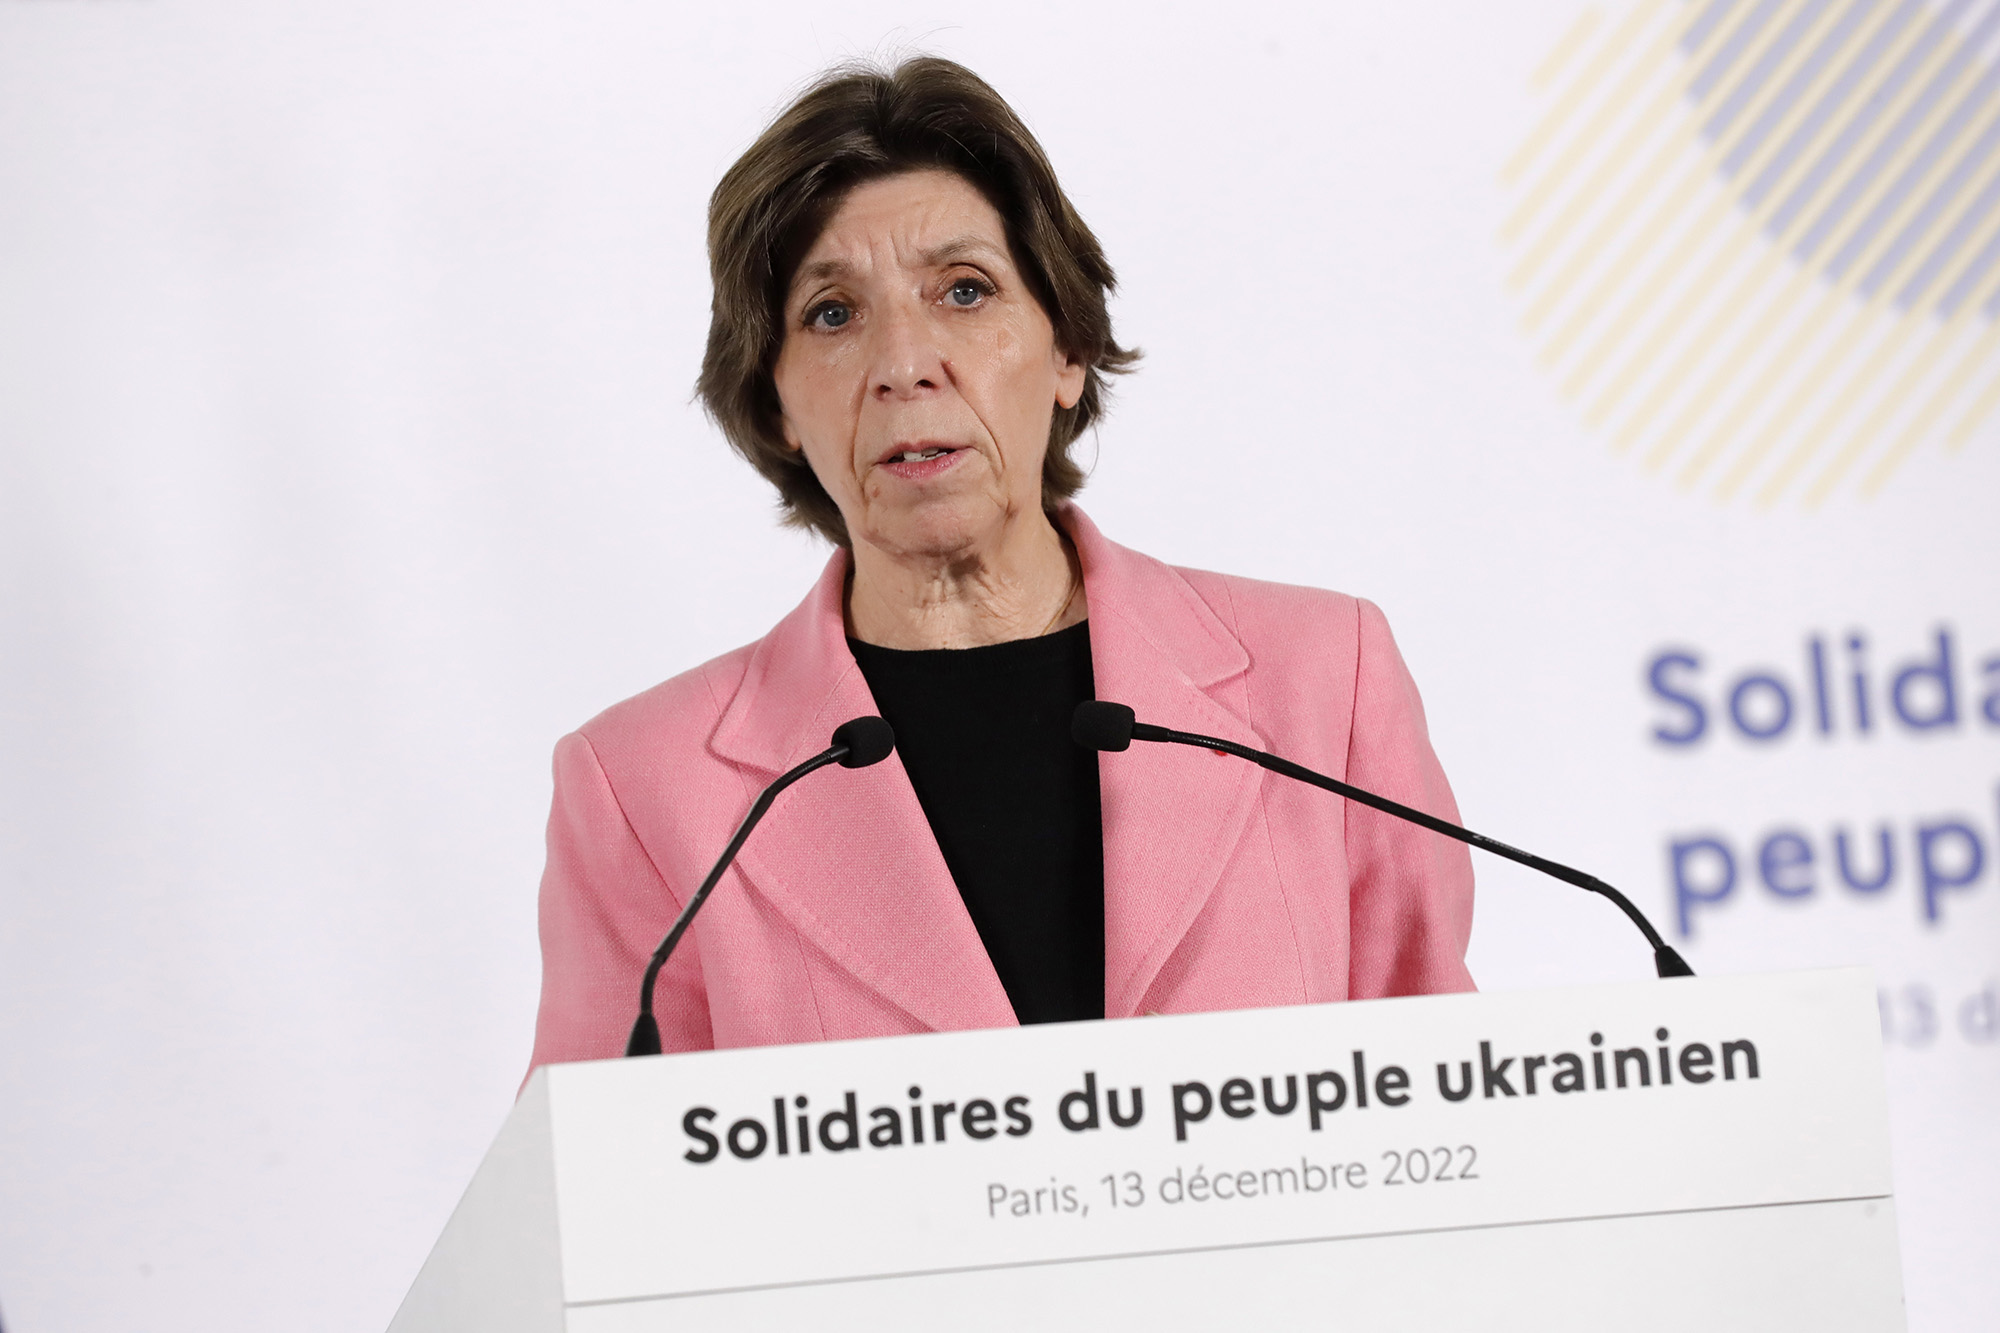 French Minister of Europe and Foreign Affairs Catherine Colonna attends a press conference after the 'Conference in solidarity with the Ukrainian people' in Paris, France, on December 13.